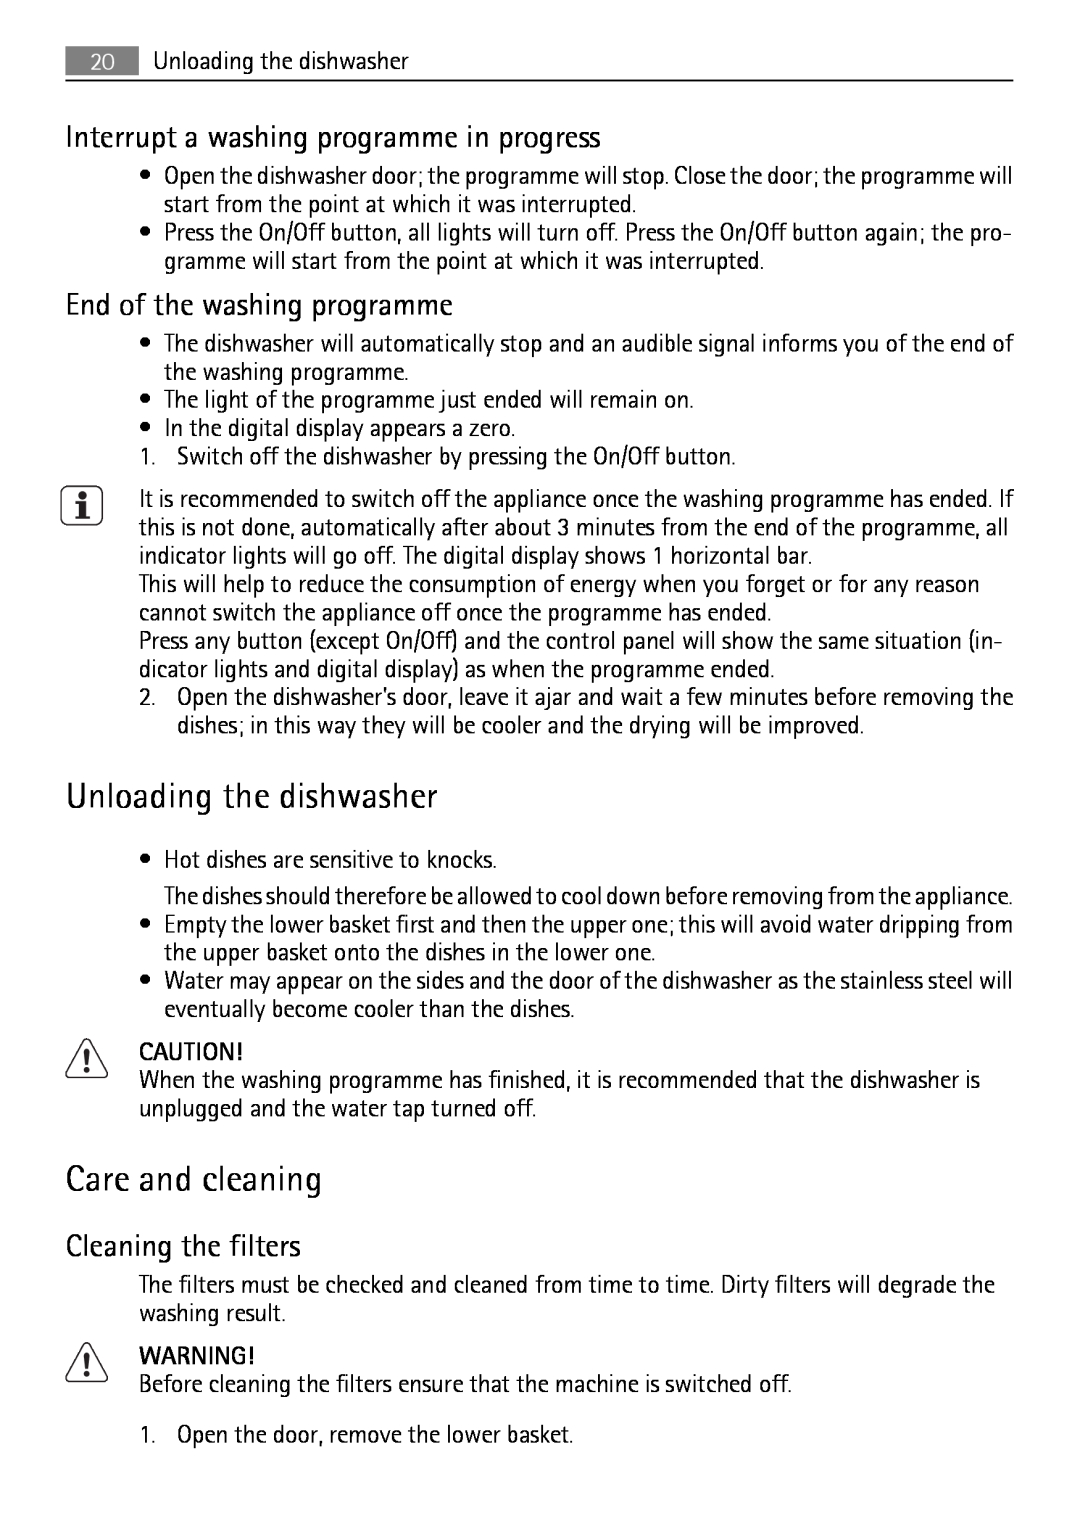 Electrolux QB 5201 user manual Unloading the dishwasher, Care and cleaning, Interrupt a washing programme in progress 